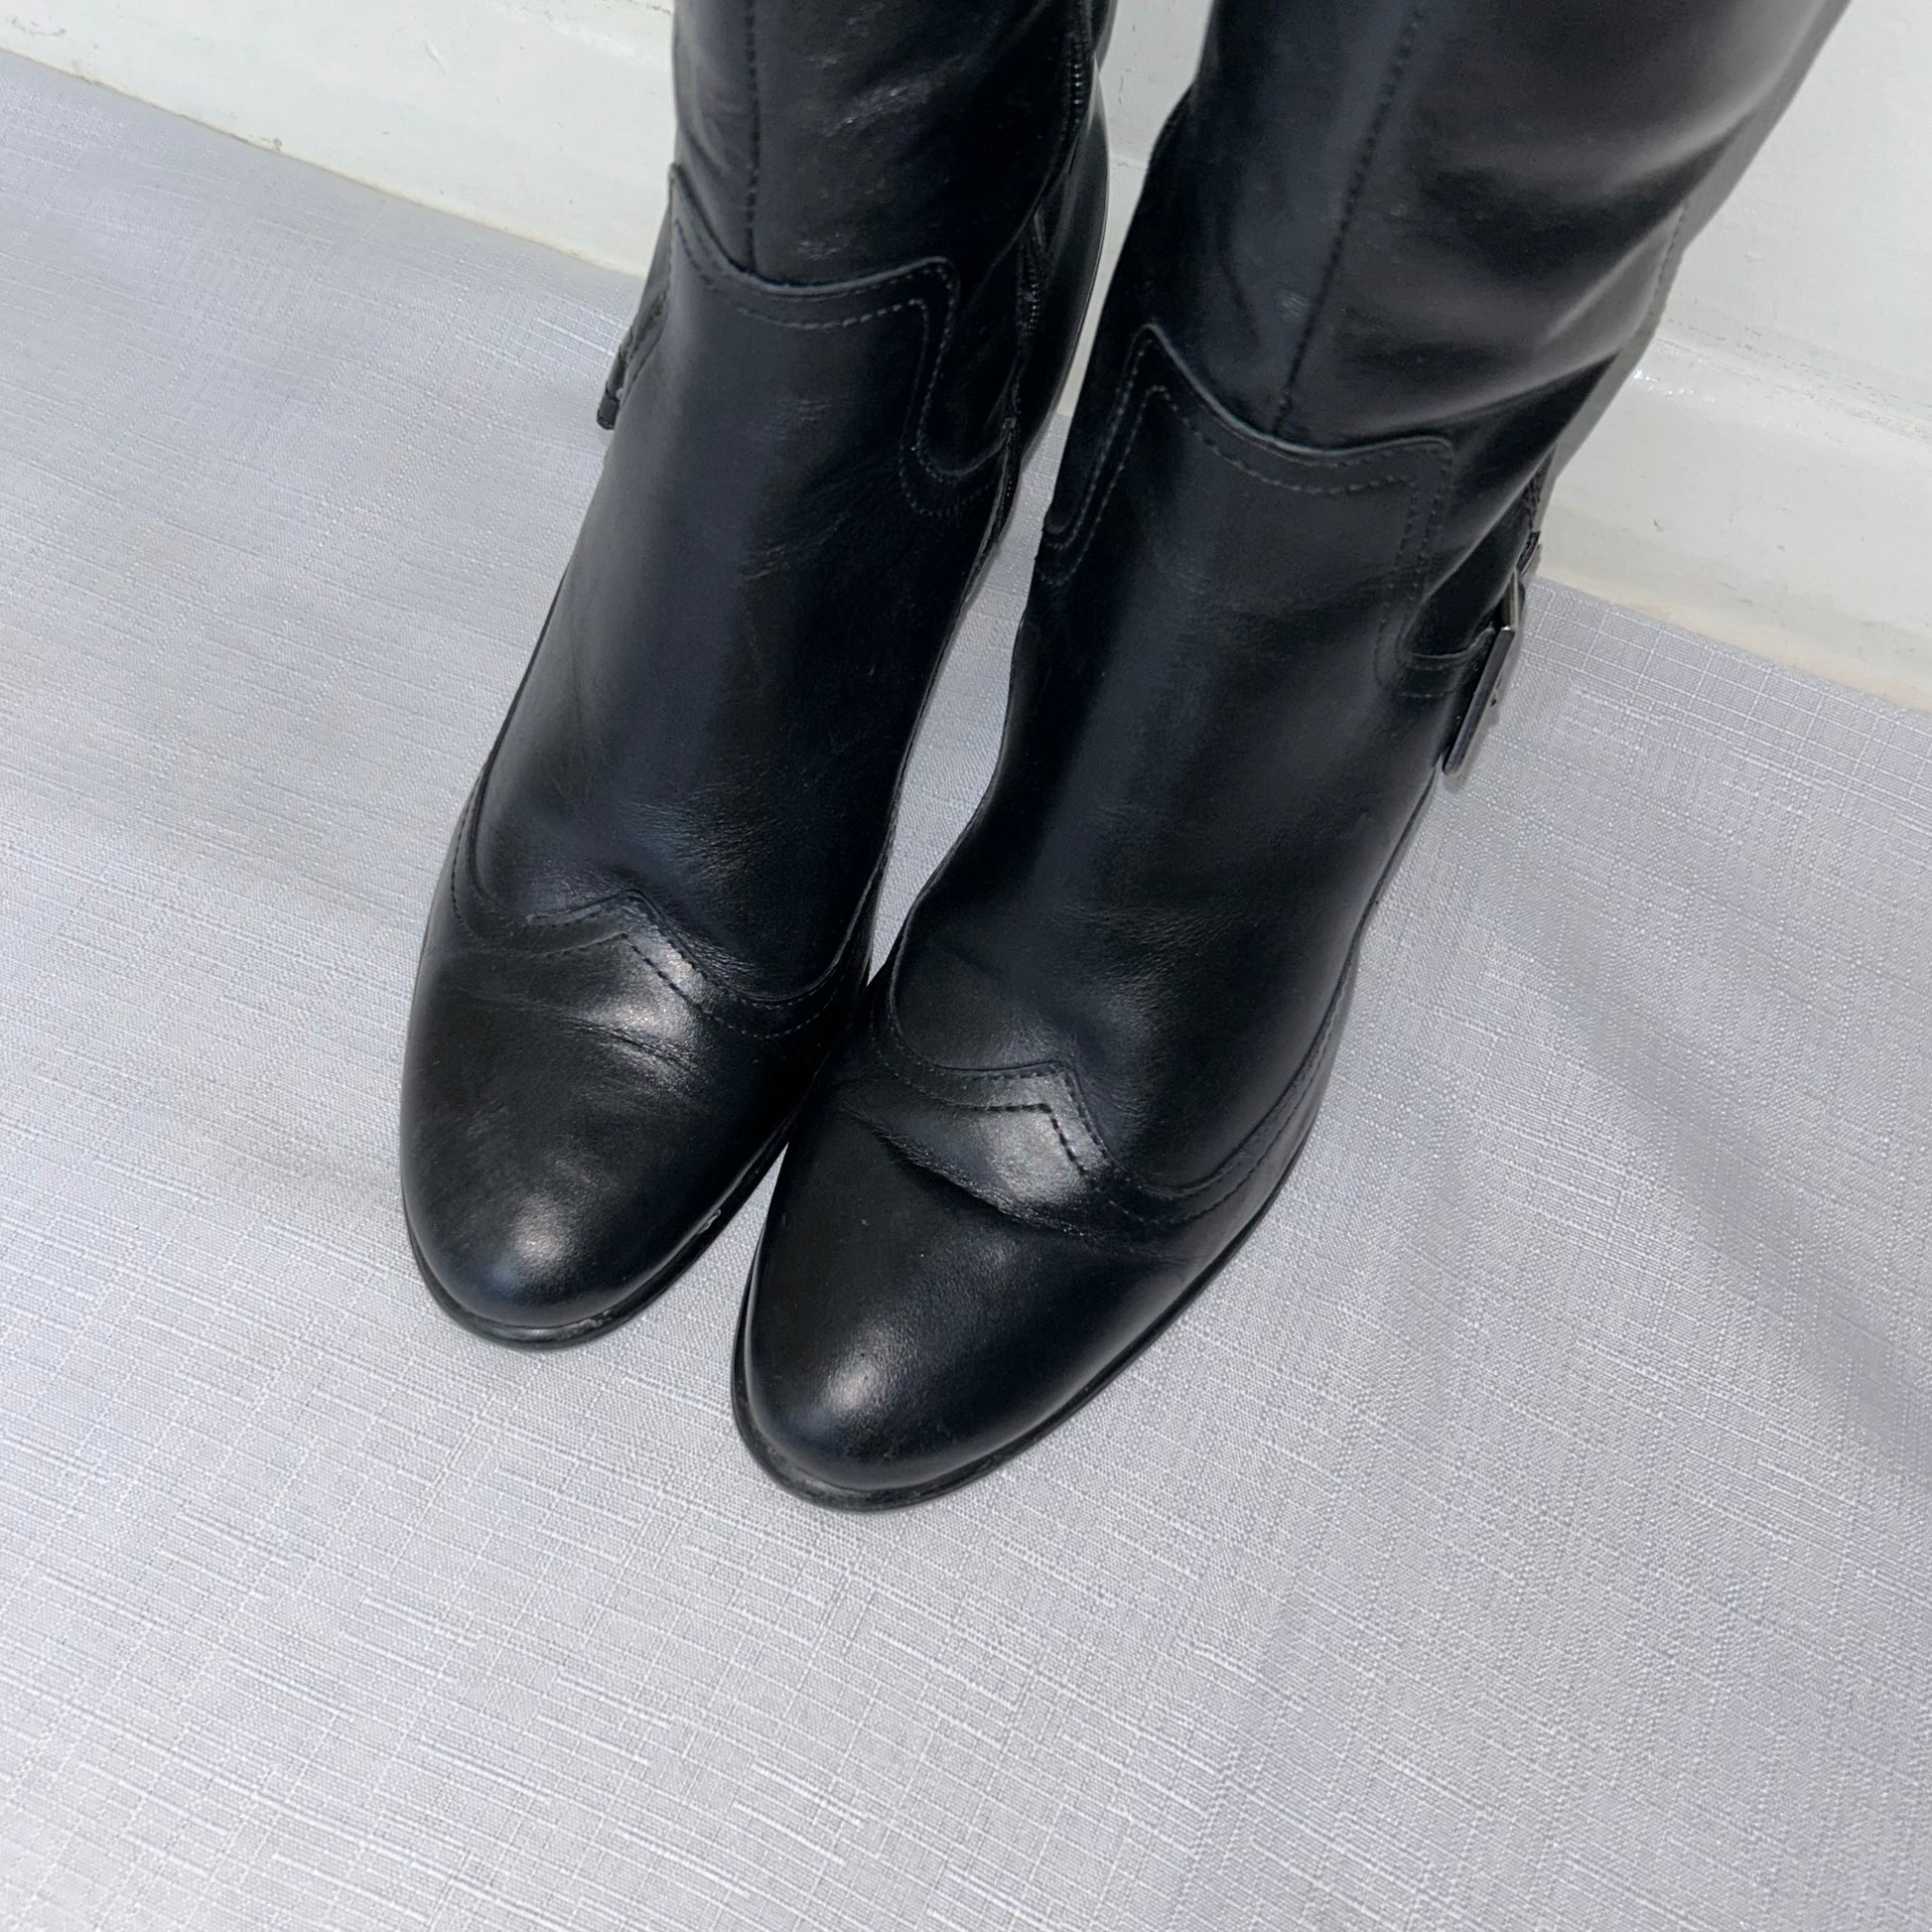 toes of black knee high block heel leather boots shown on a white background